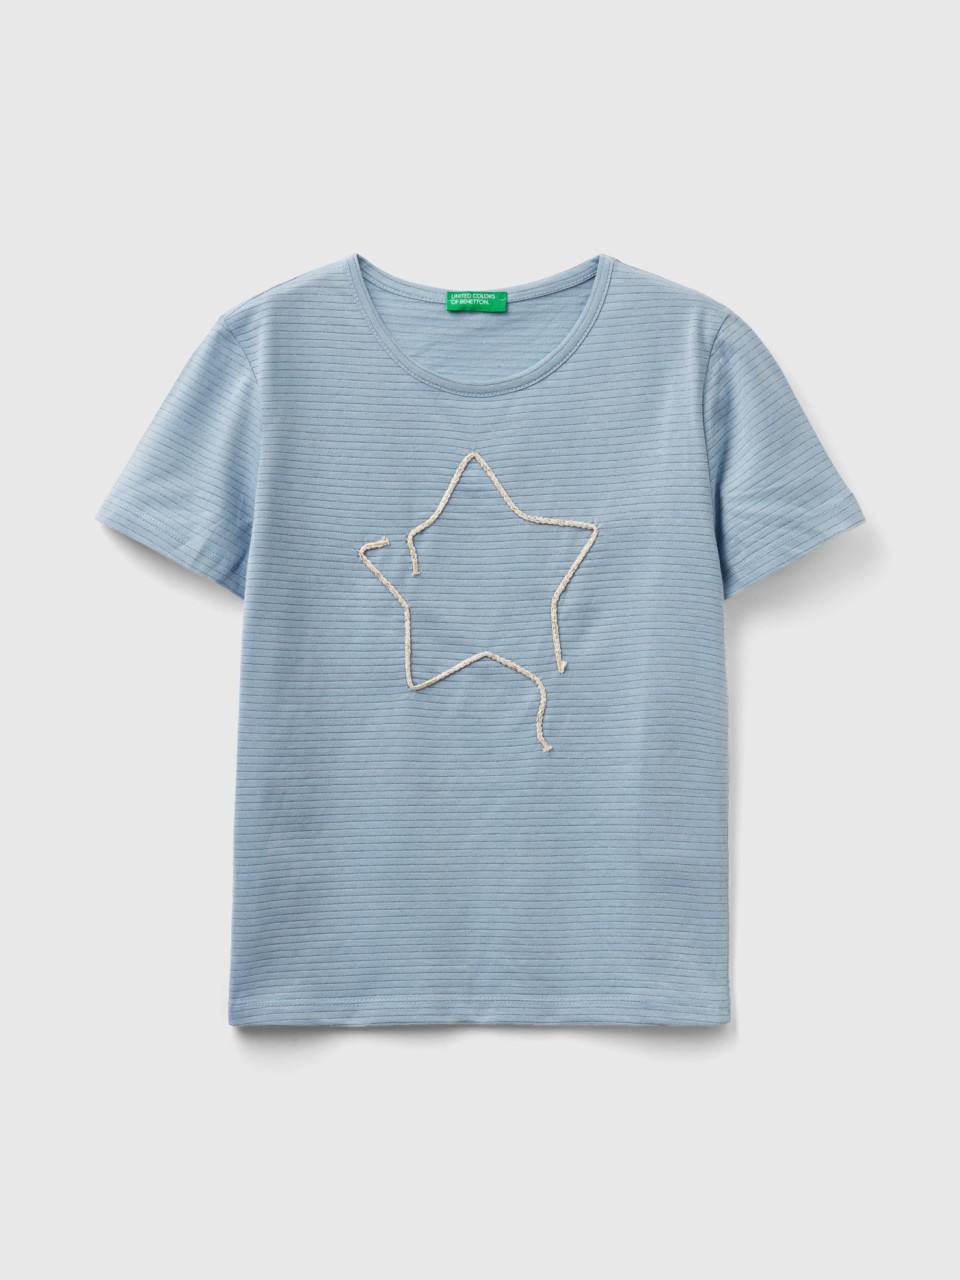 Benetton, T-shirt With Cord Embroidery, Sky Blue, Kids